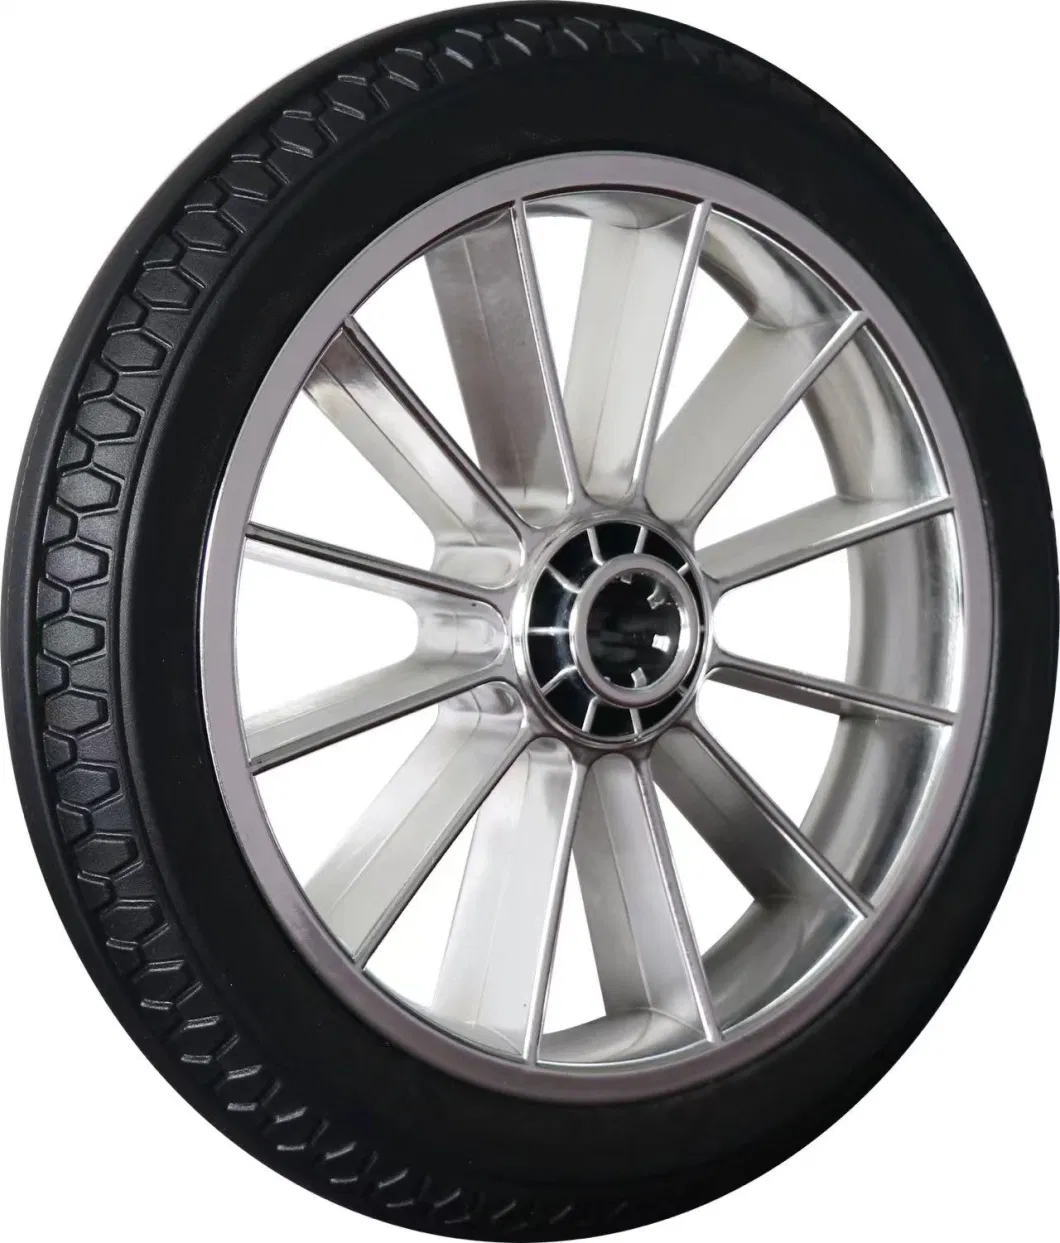 Universal PU Shock Absorbing Tyre for Buggy